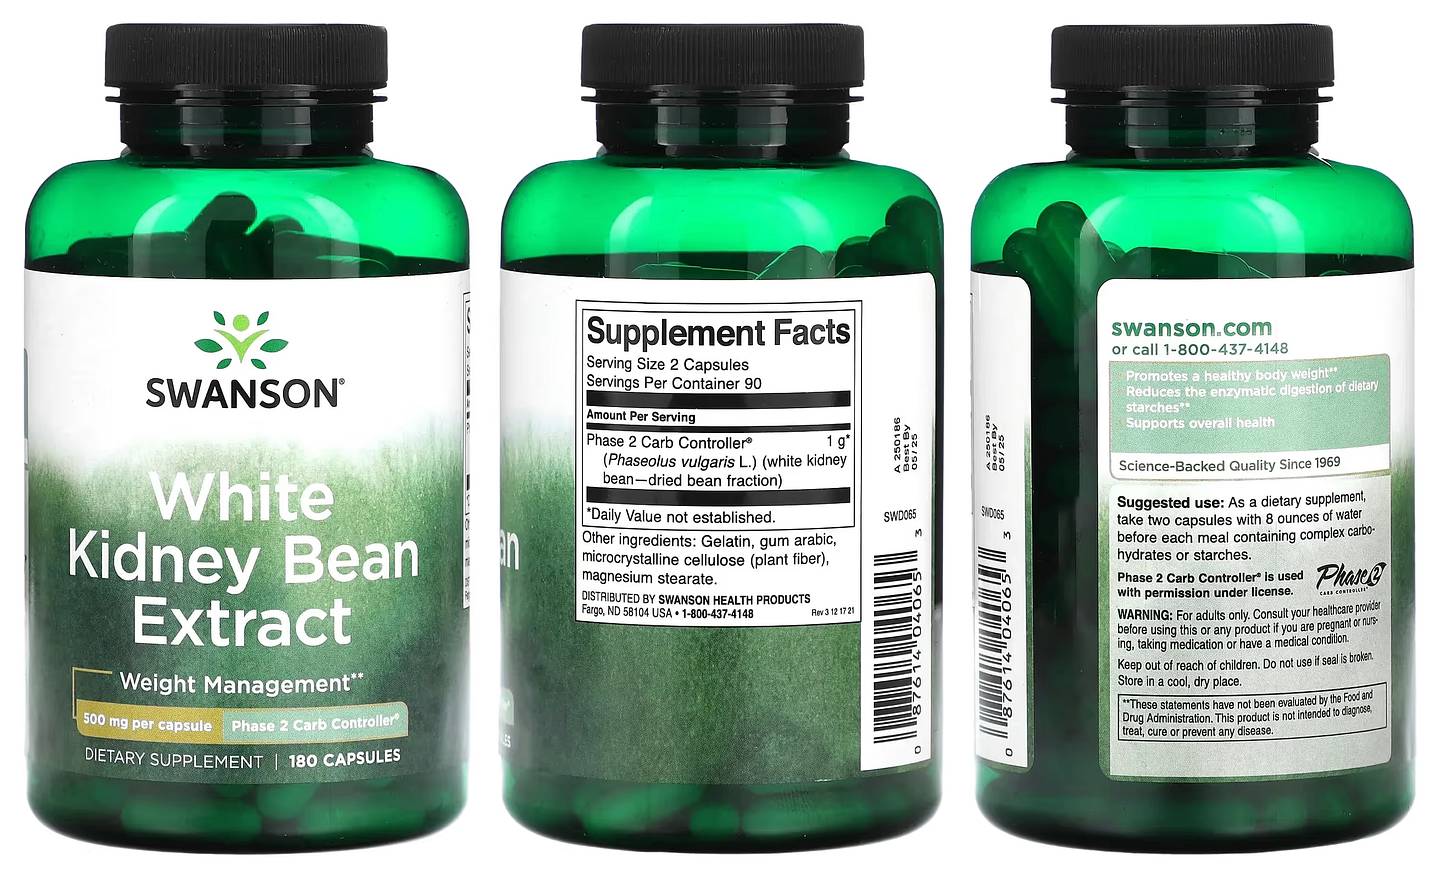 Swanson, White Kidney Bean Extract packaging